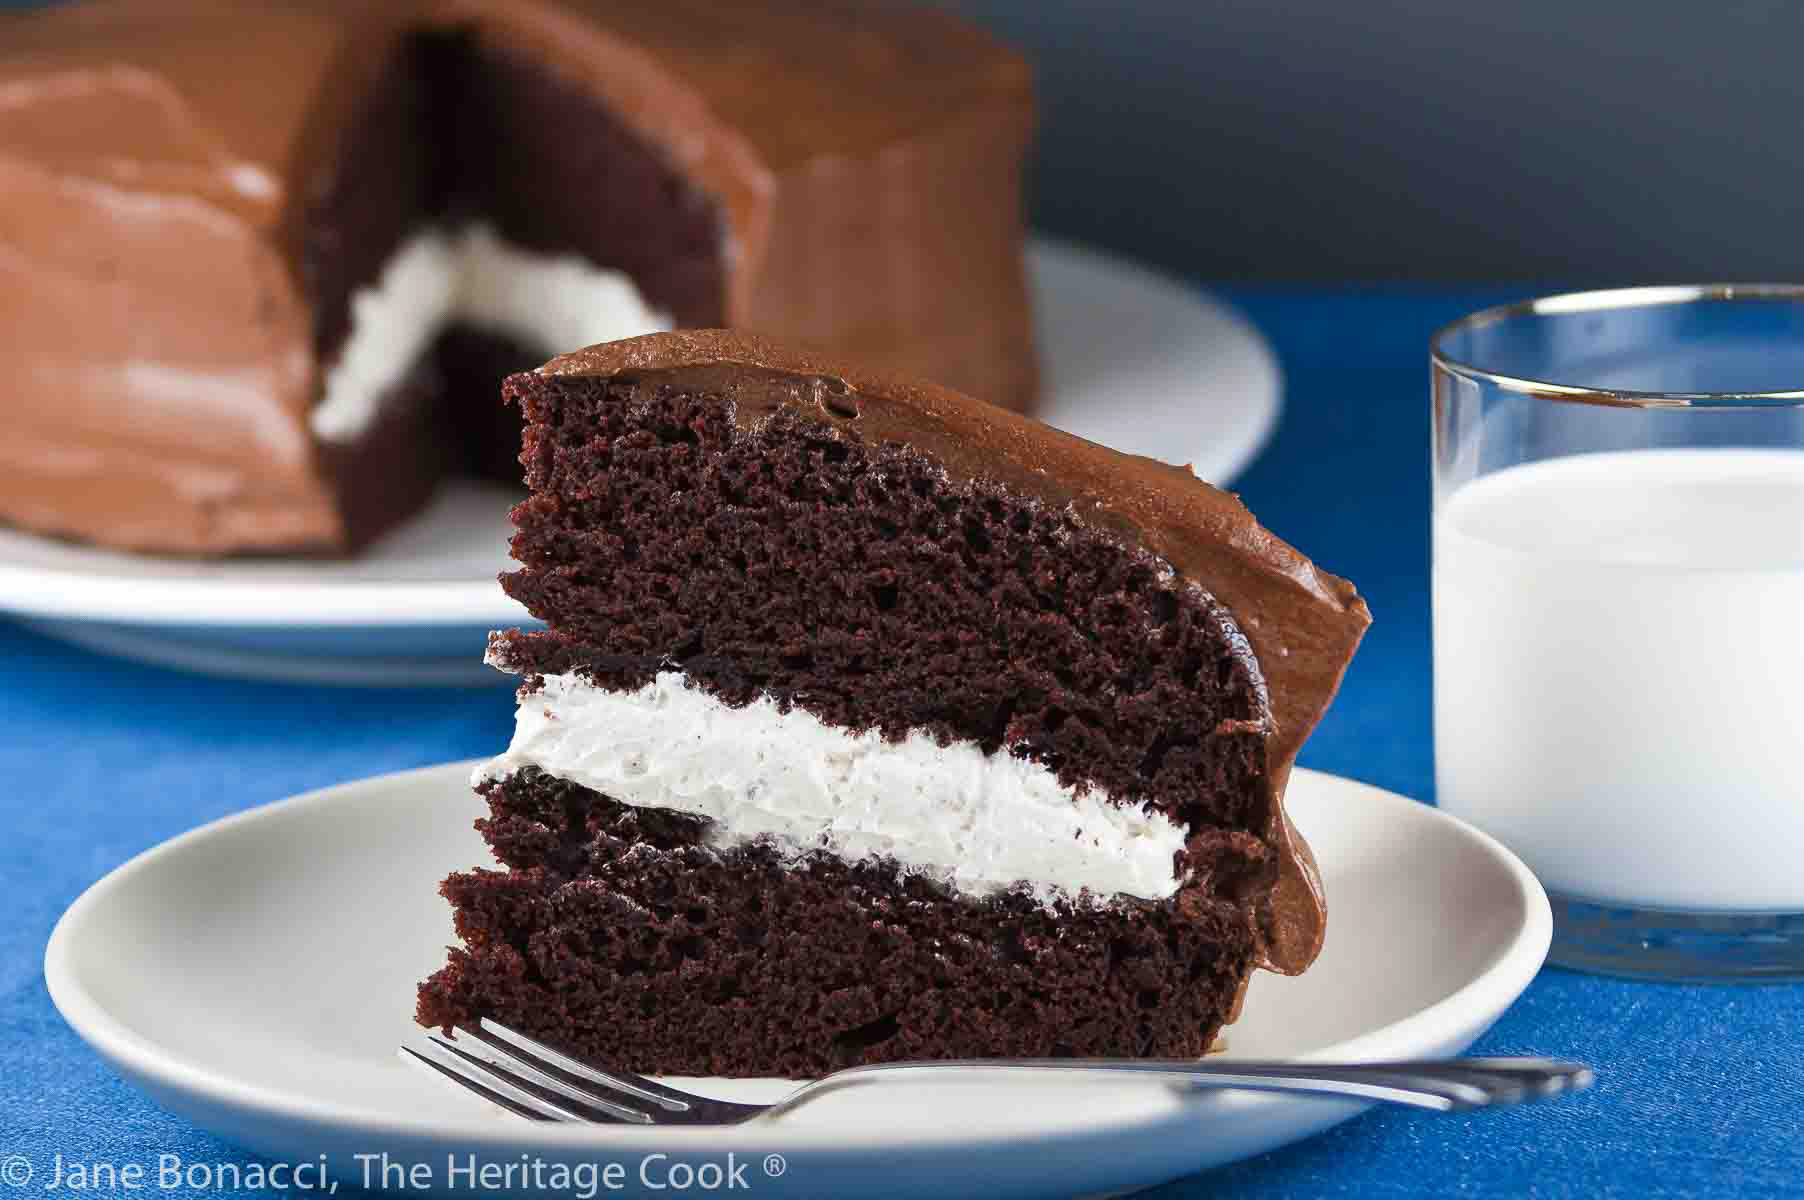 Little Debbie Layer Cake; Collection of the Top 10 Chocolate Recipes from 2023 on The Heritage Cook website © 2023 compiled by Jane Bonacci, The Heritage Cook. 